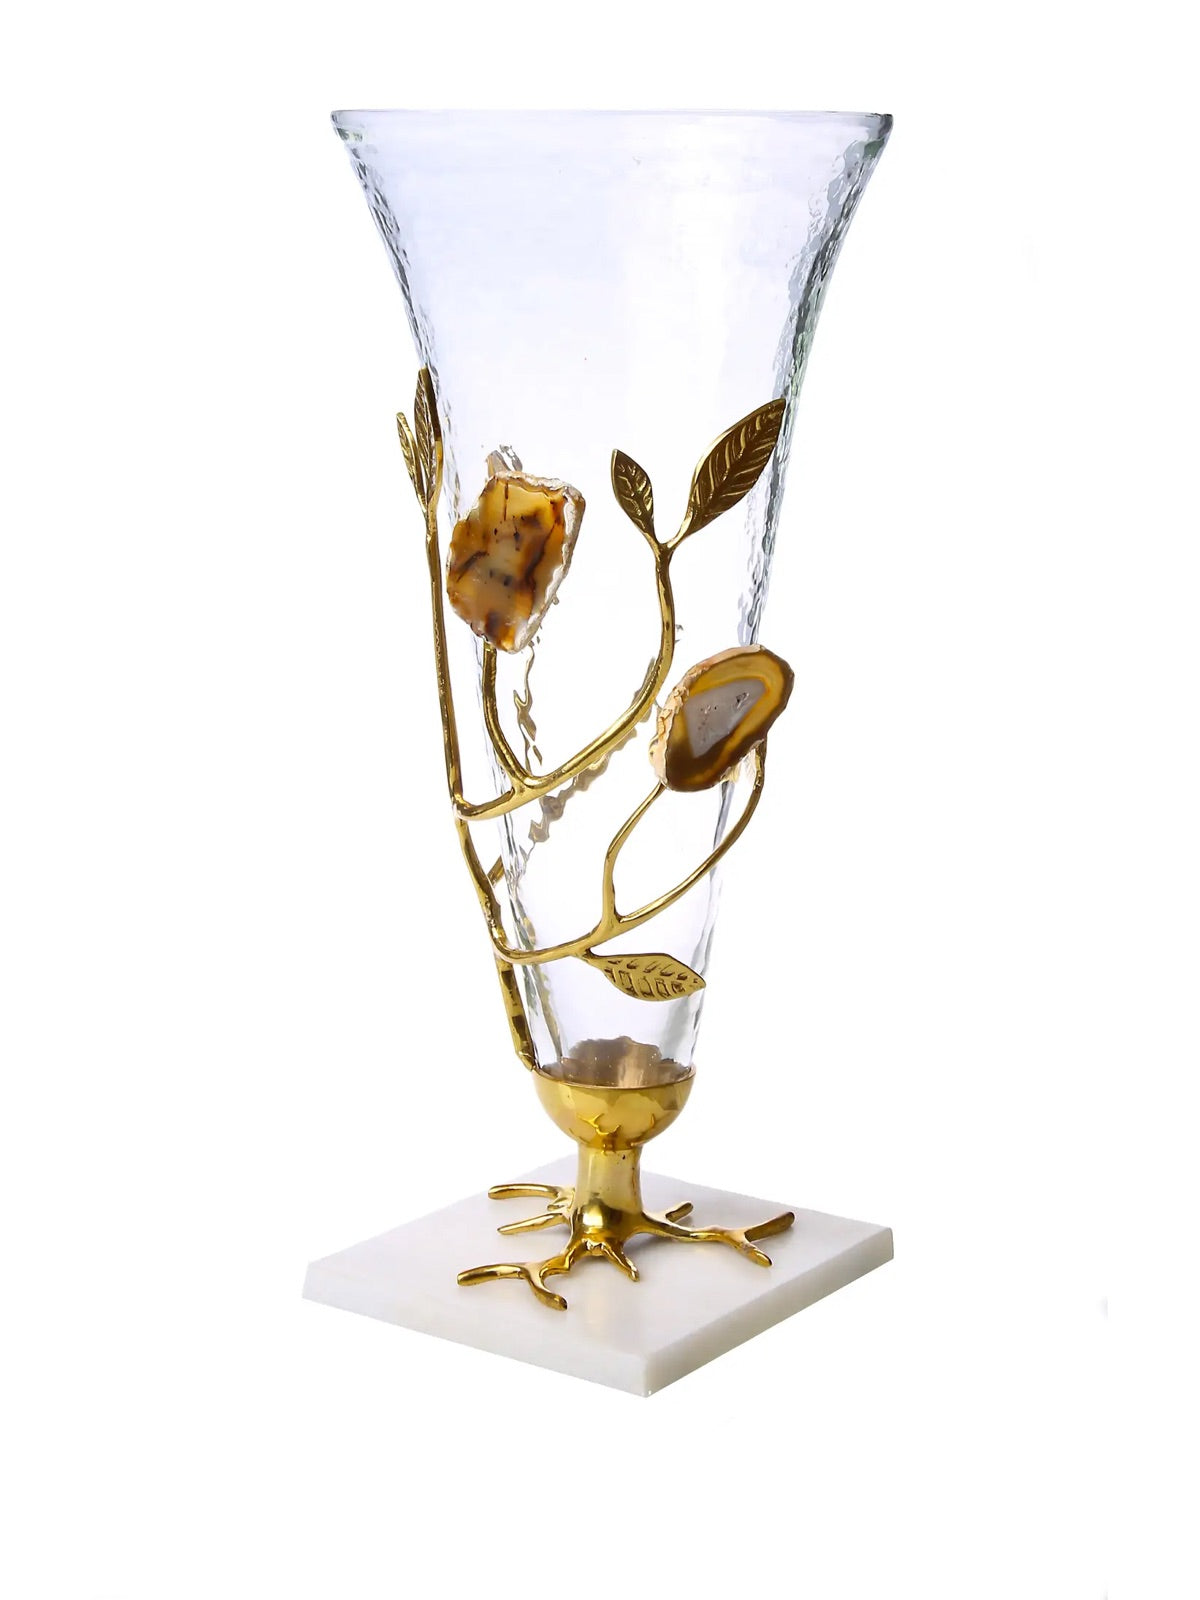 15H Luxury Glass Vase With Gold Leaf Surrounding its Exterior on a Agate Stone Base - KYA Home Decor 